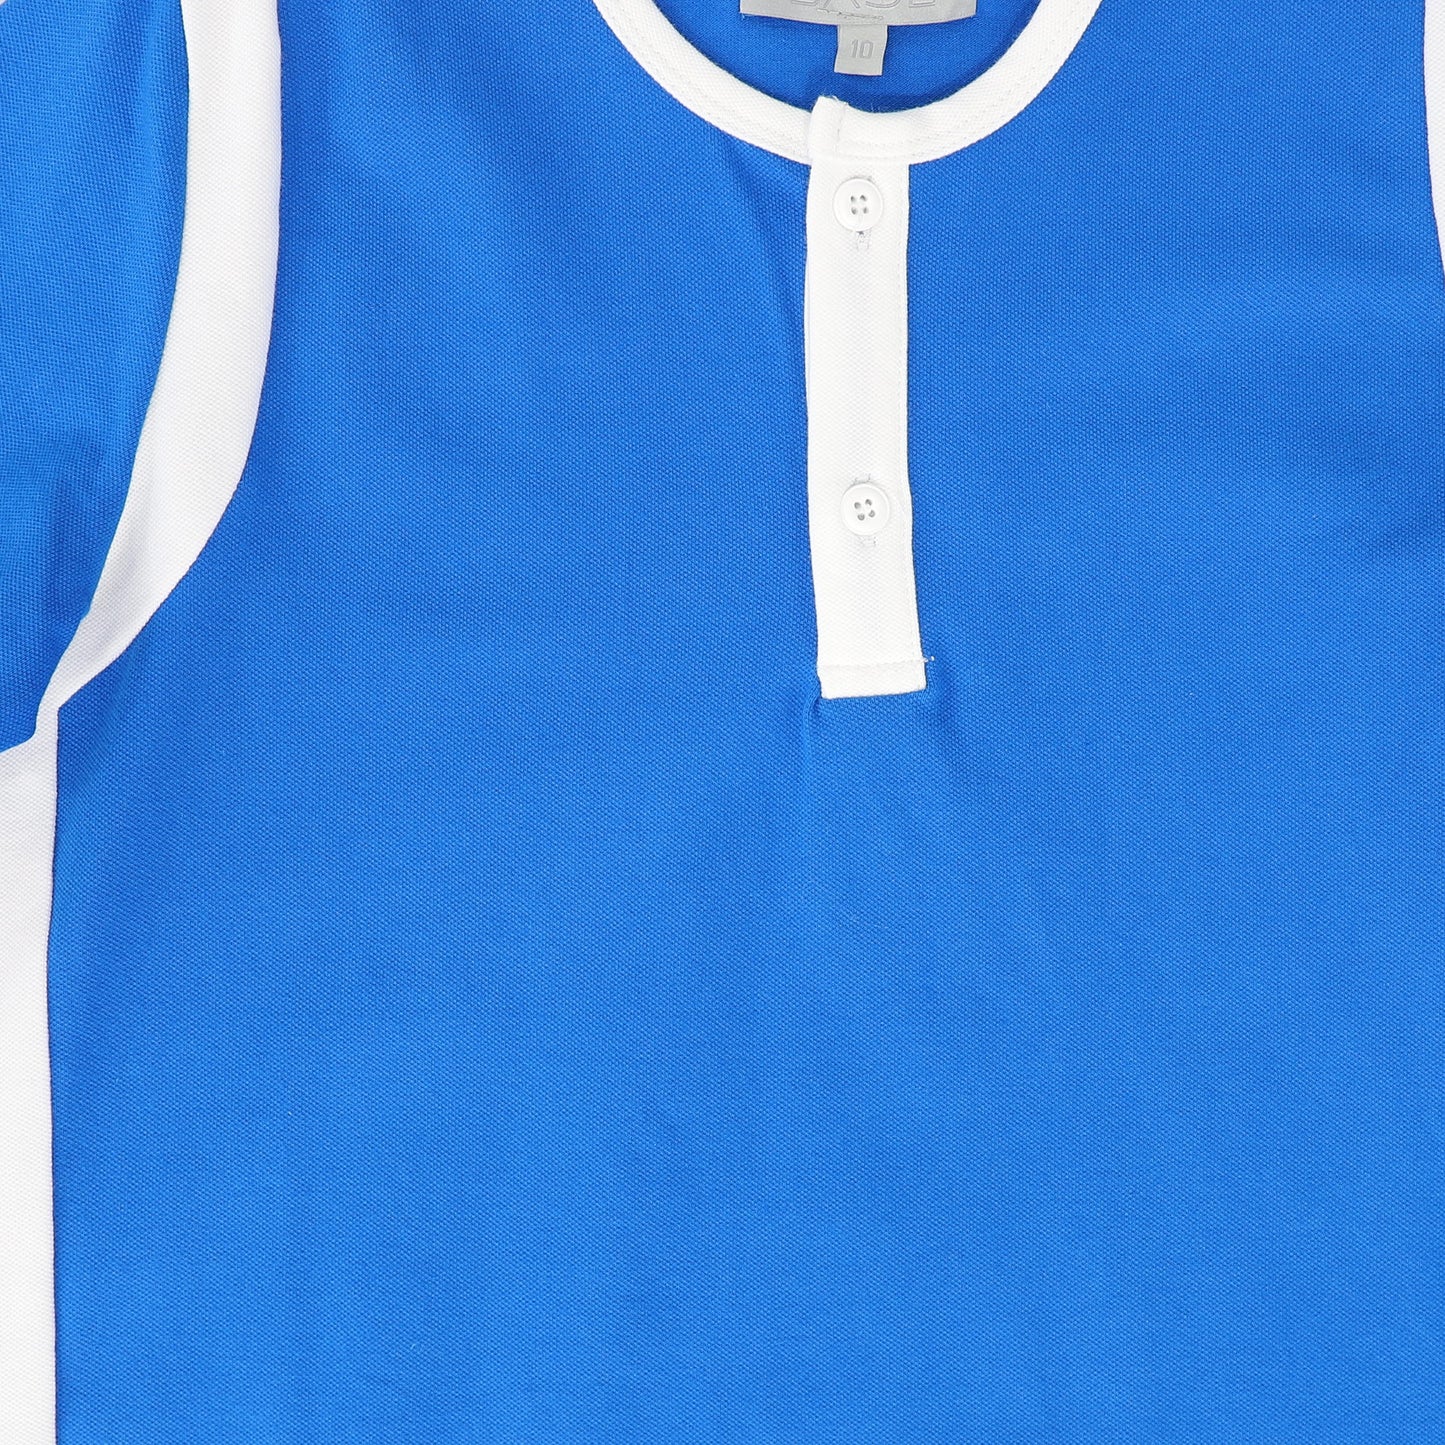 BACE COLLECTION BLUE PIQUE VARSITY SS TEE [FINAL SALE]